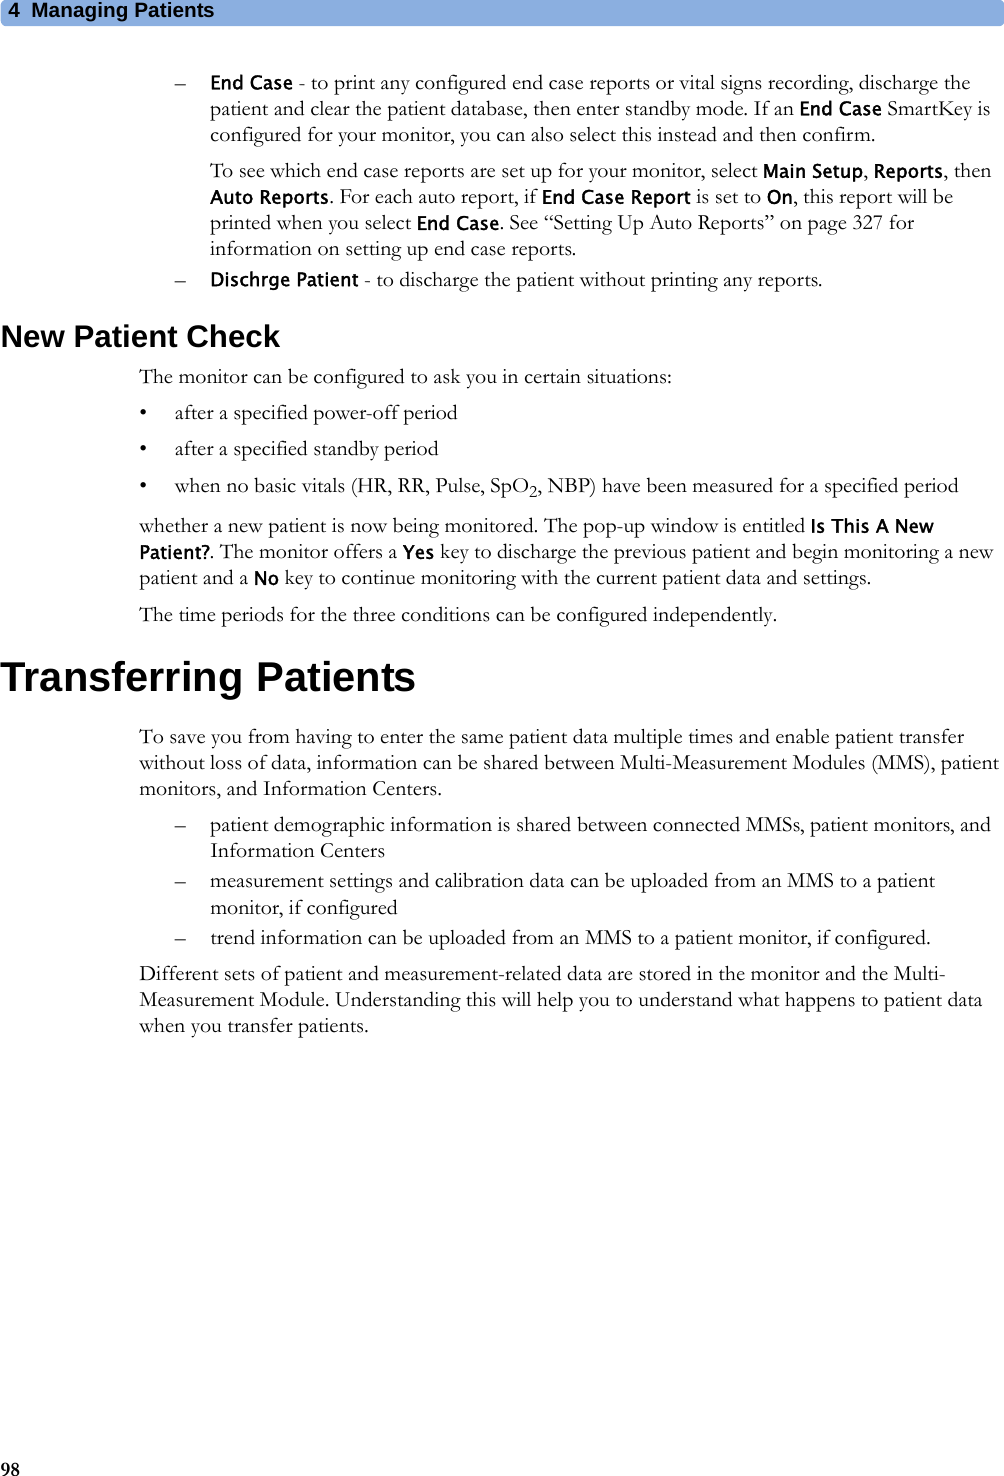 4 Managing Patients98–End Case - to print any configured end case reports or vital signs recording, discharge the patient and clear the patient database, then enter standby mode. If an End Case SmartKey is configured for your monitor, you can also select this instead and then confirm.To see which end case reports are set up for your monitor, select Main Setup, Reports, then Auto Reports. For each auto report, if End Case Report is set to On, this report will be printed when you select End Case. See “Setting Up Auto Reports” on page 327 for information on setting up end case reports.–Dischrge Patient - to discharge the patient without printing any reports.New Patient CheckThe monitor can be configured to ask you in certain situations:• after a specified power-off period• after a specified standby period• when no basic vitals (HR, RR, Pulse, SpO2, NBP) have been measured for a specified periodwhether a new patient is now being monitored. The pop-up window is entitled Is This A New Patient?. The monitor offers a Yes key to discharge the previous patient and begin monitoring a new patient and a No key to continue monitoring with the current patient data and settings.The time periods for the three conditions can be configured independently.Transferring PatientsTo save you from having to enter the same patient data multiple times and enable patient transfer without loss of data, information can be shared between Multi-Measurement Modules (MMS), patient monitors, and Information Centers.– patient demographic information is shared between connected MMSs, patient monitors, and Information Centers– measurement settings and calibration data can be uploaded from an MMS to a patient monitor, if configured– trend information can be uploaded from an MMS to a patient monitor, if configured.Different sets of patient and measurement-related data are stored in the monitor and the Multi-Measurement Module. Understanding this will help you to understand what happens to patient data when you transfer patients.